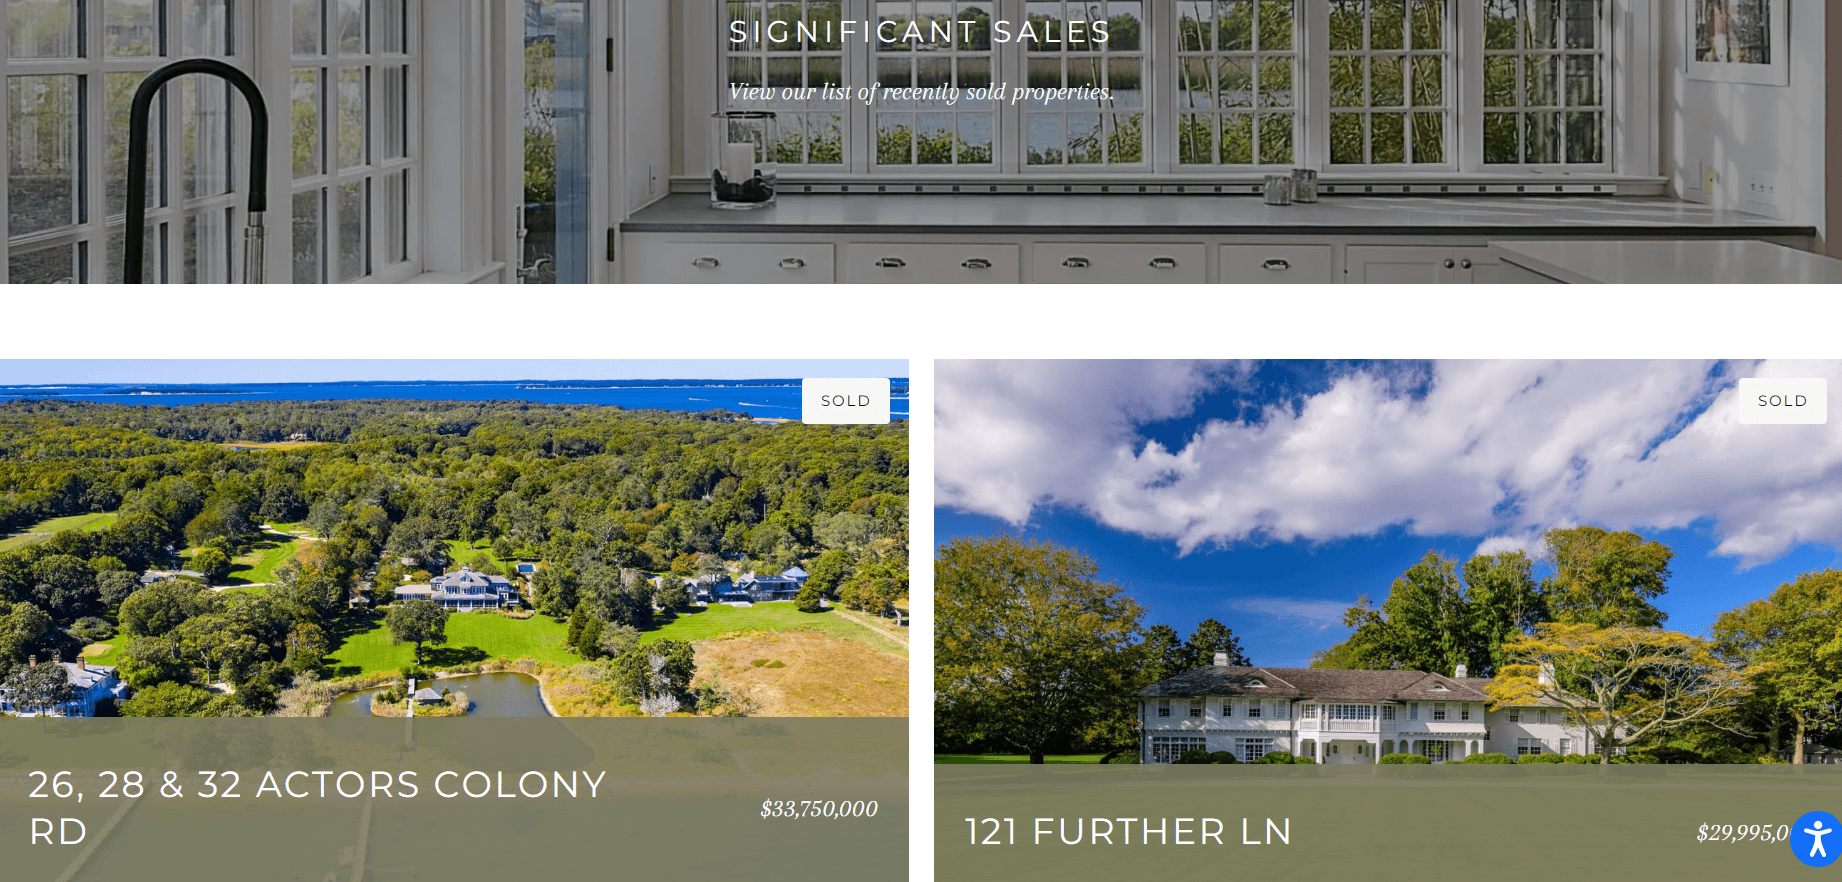 Real Estate - Significant Sales Webpage Example